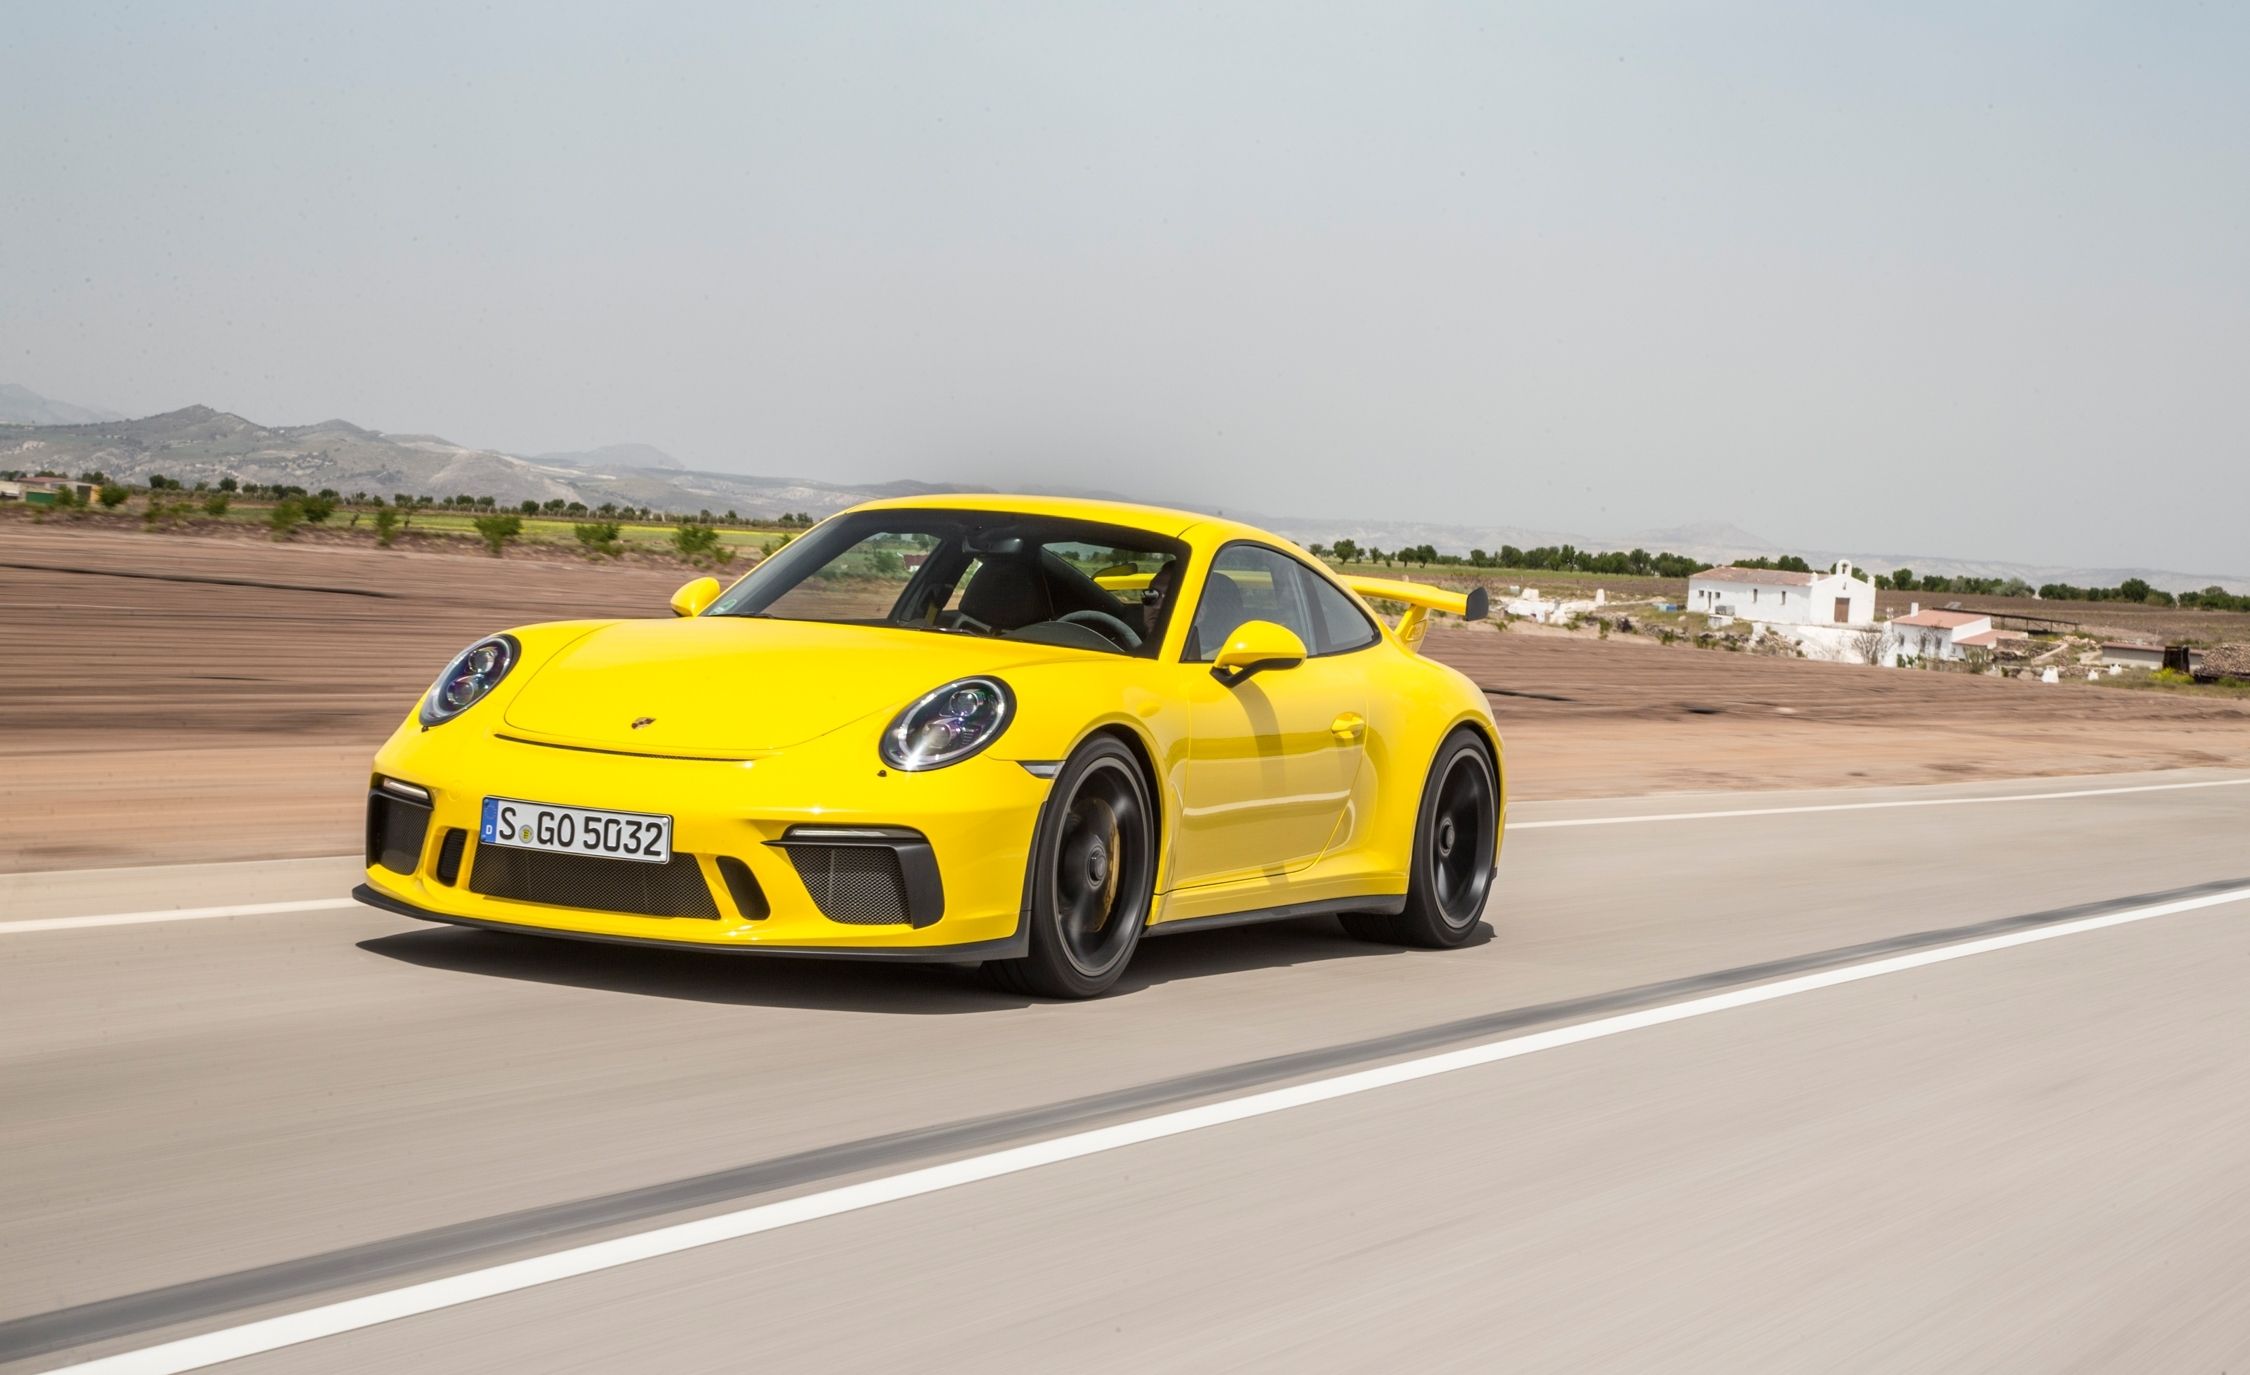 The 2018 911 GT3 sets a new best lap time: 7 minutes, 12.7 seconds